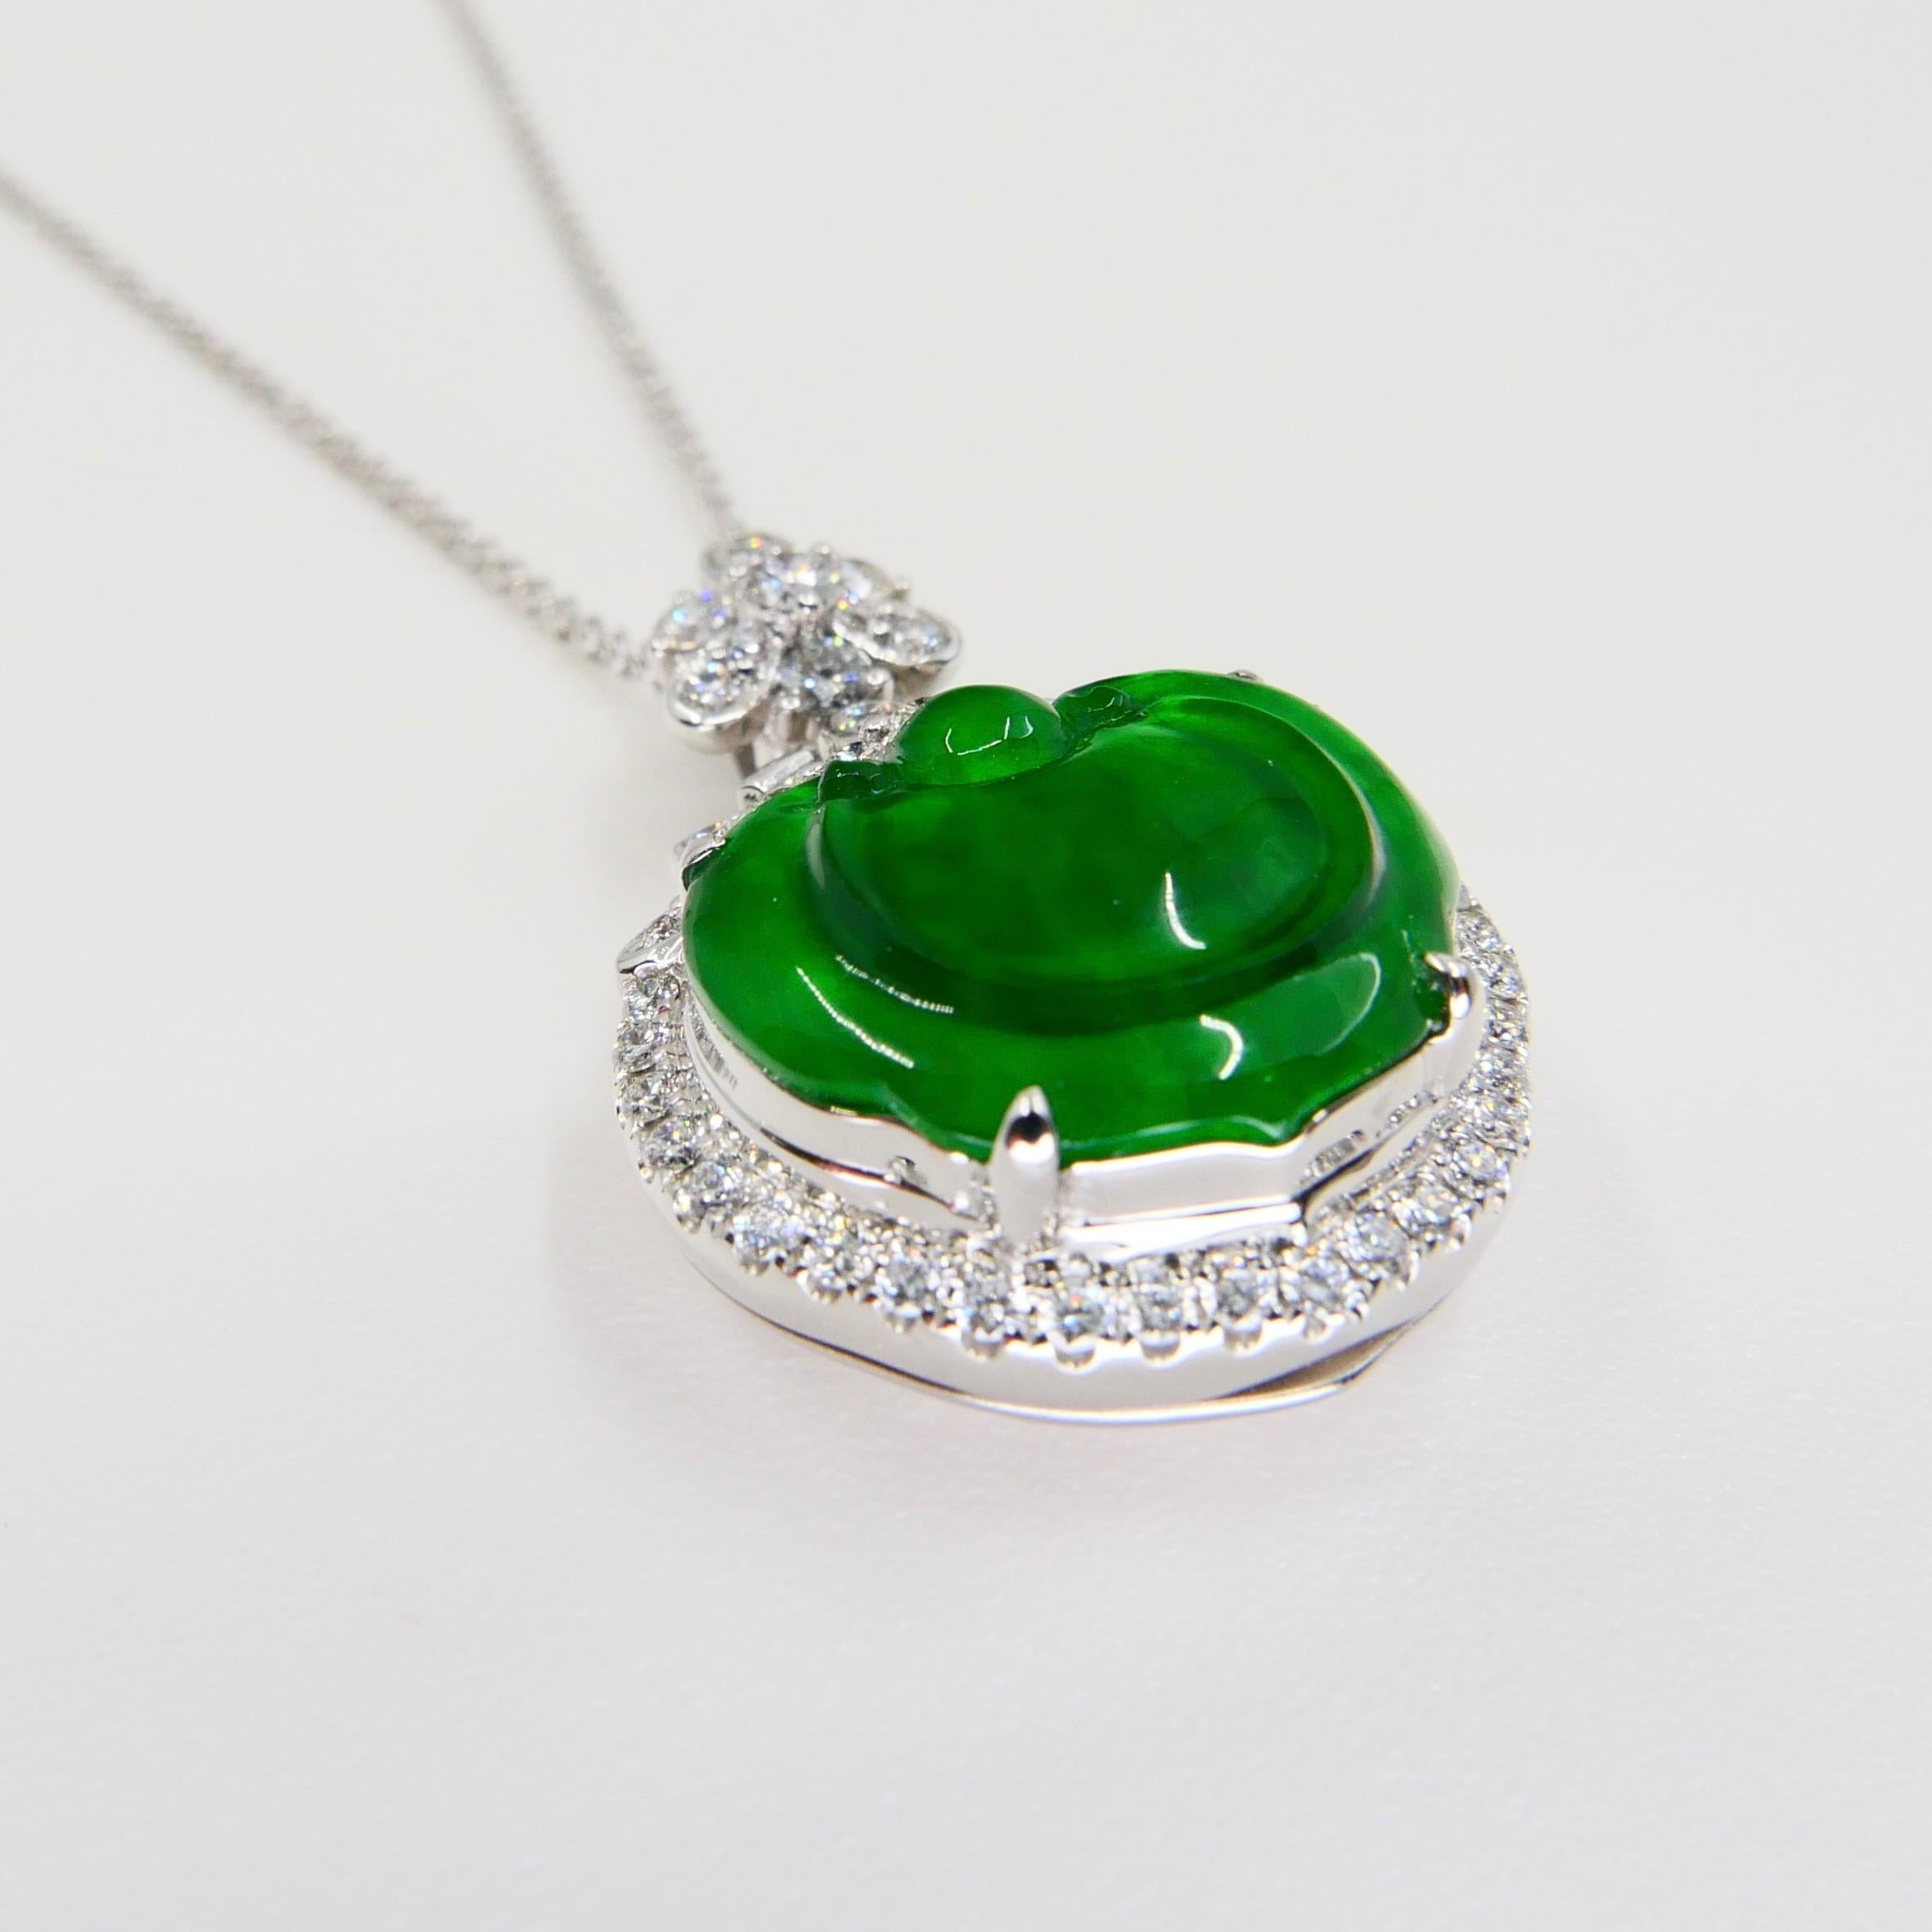 Certified Type A Icy Jade & Diamond Pendant Necklace, Glowing Apple Green Color For Sale 1